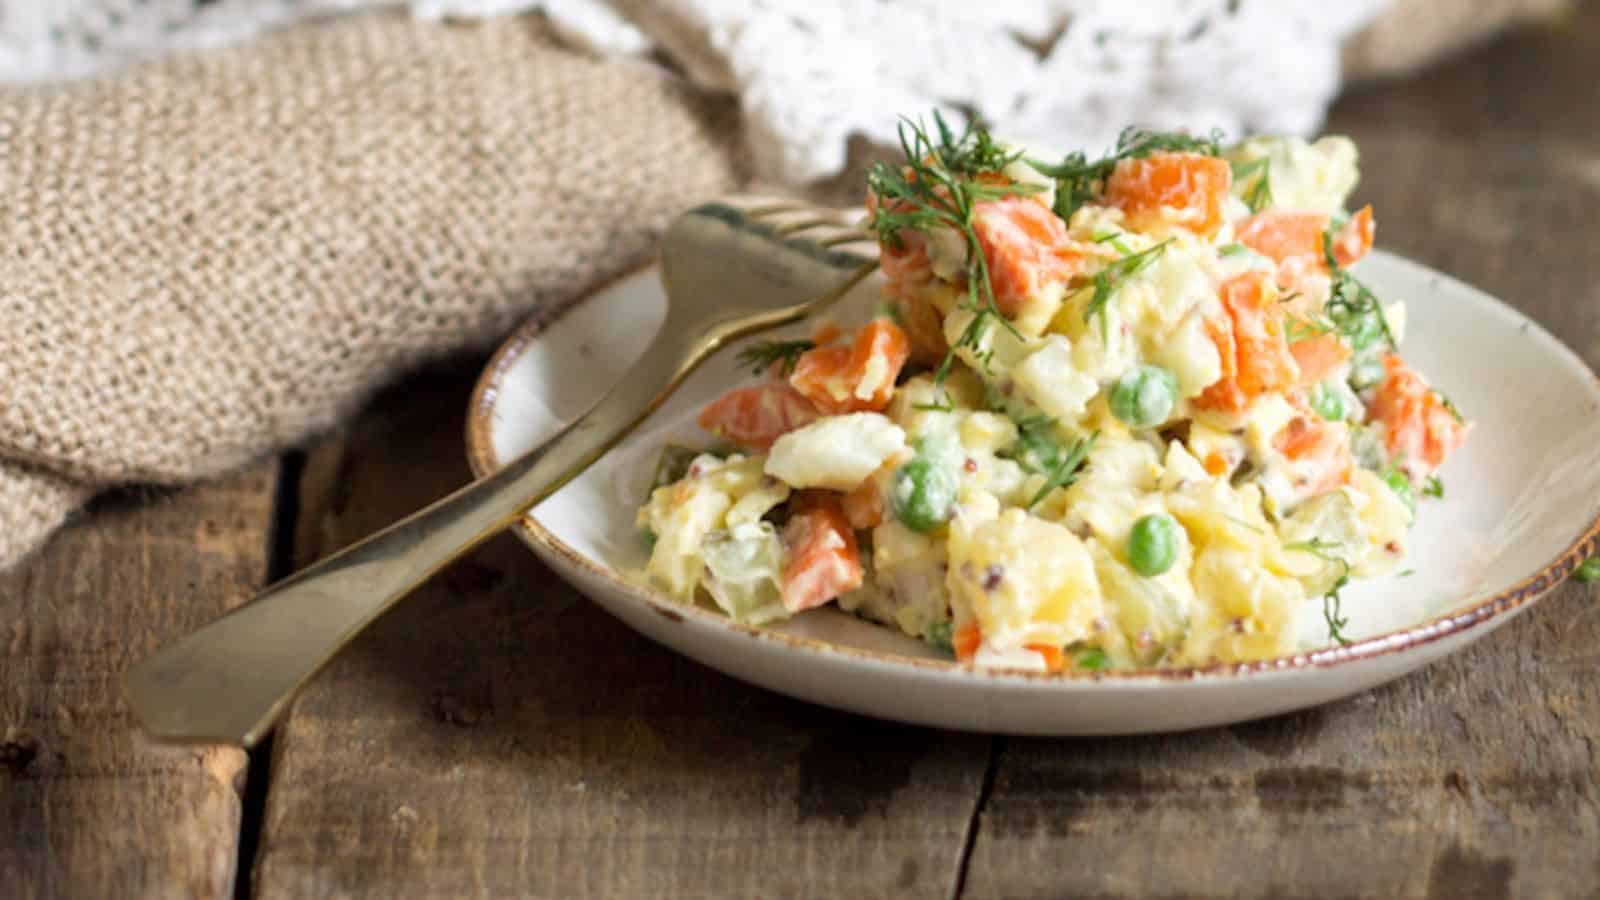 Overhead view of olivier salad with two egg halves.